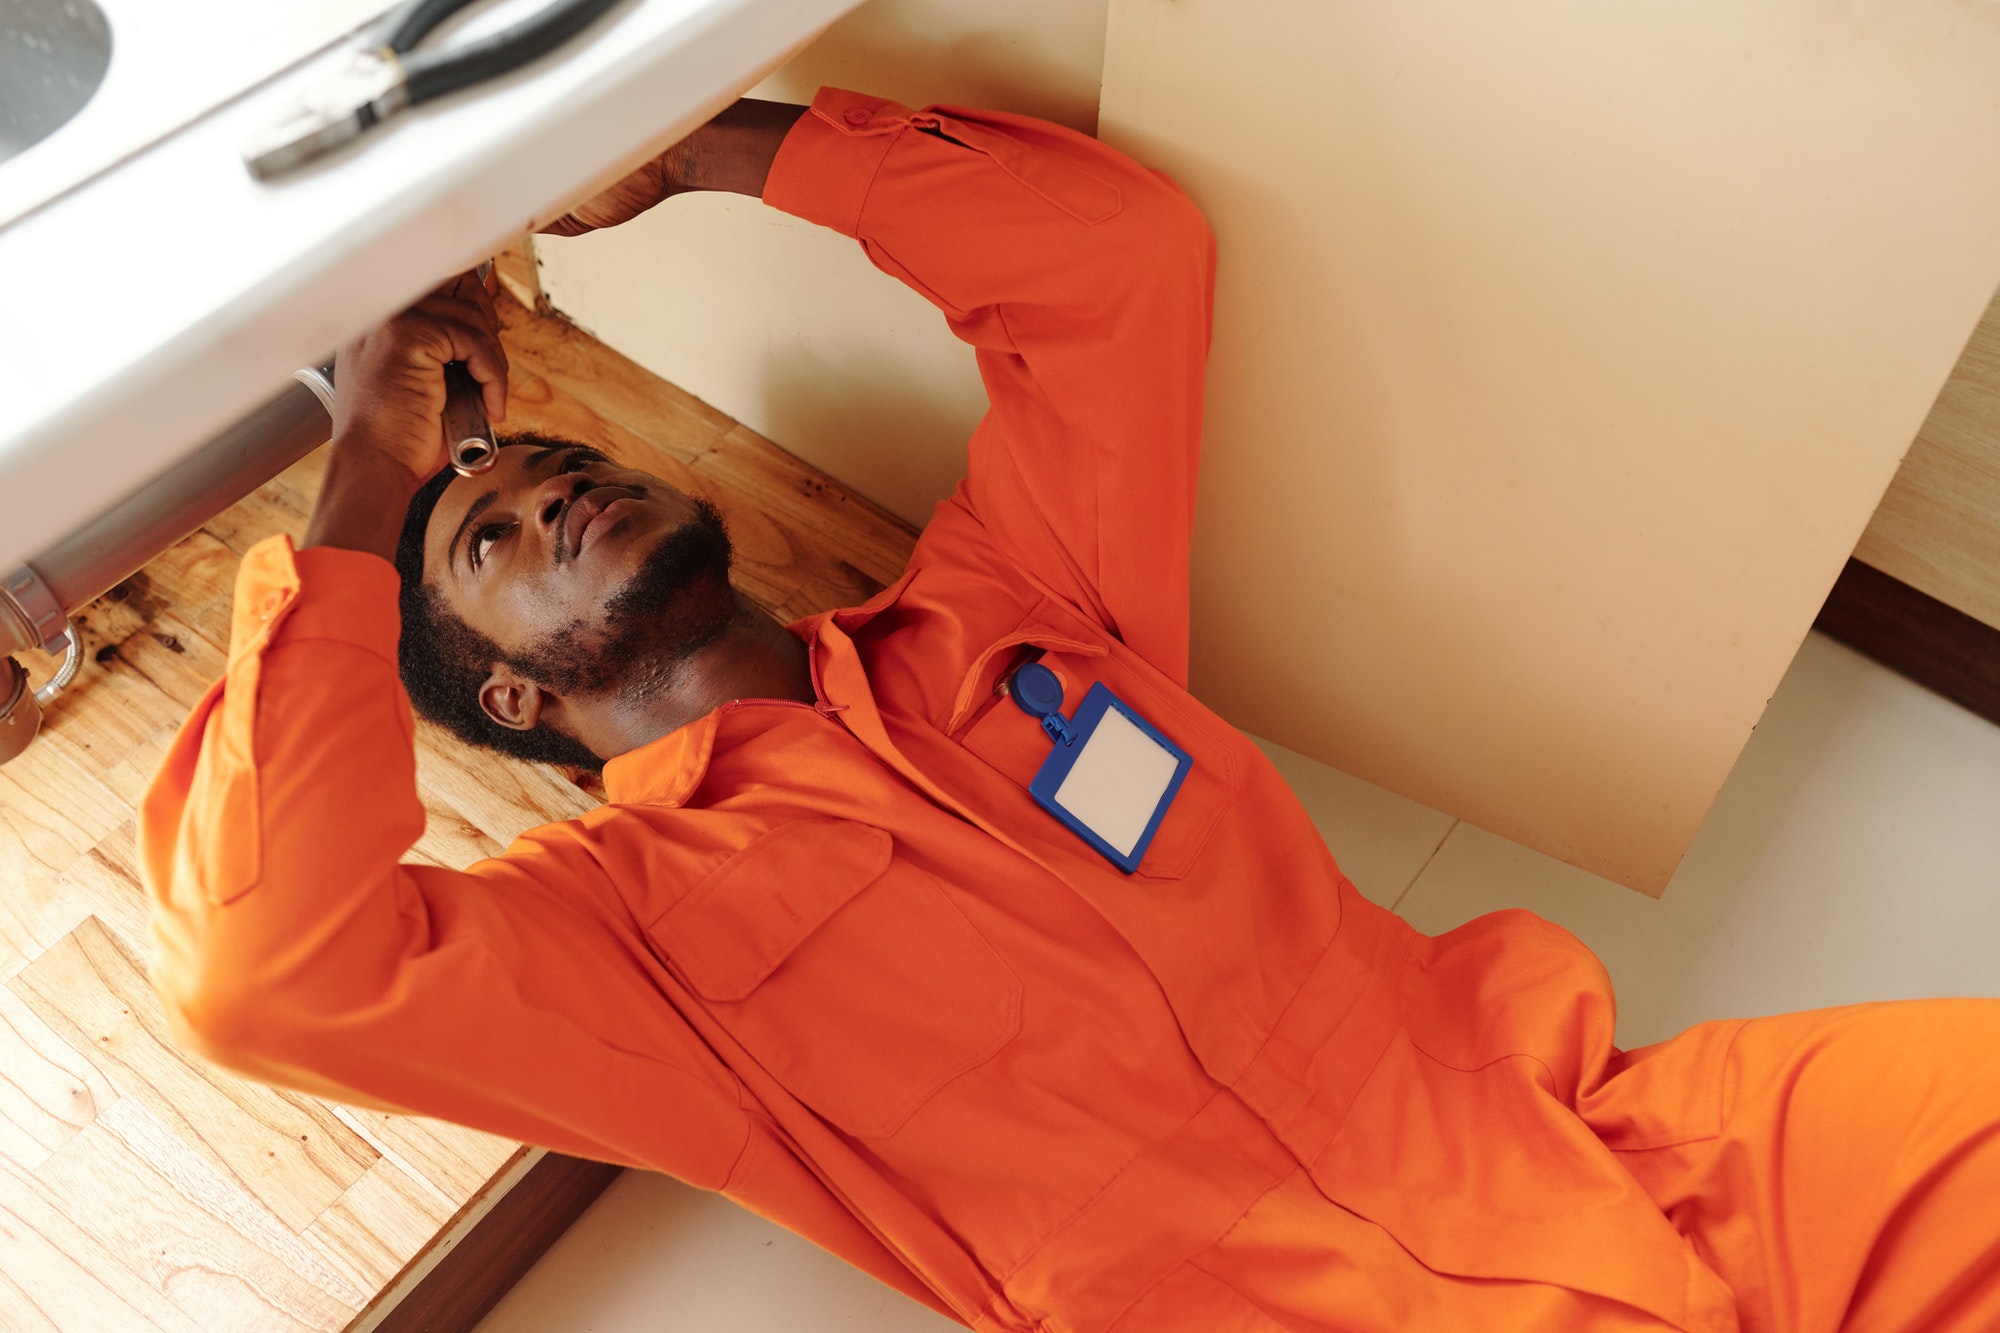 Black plumber fixing clogged drains